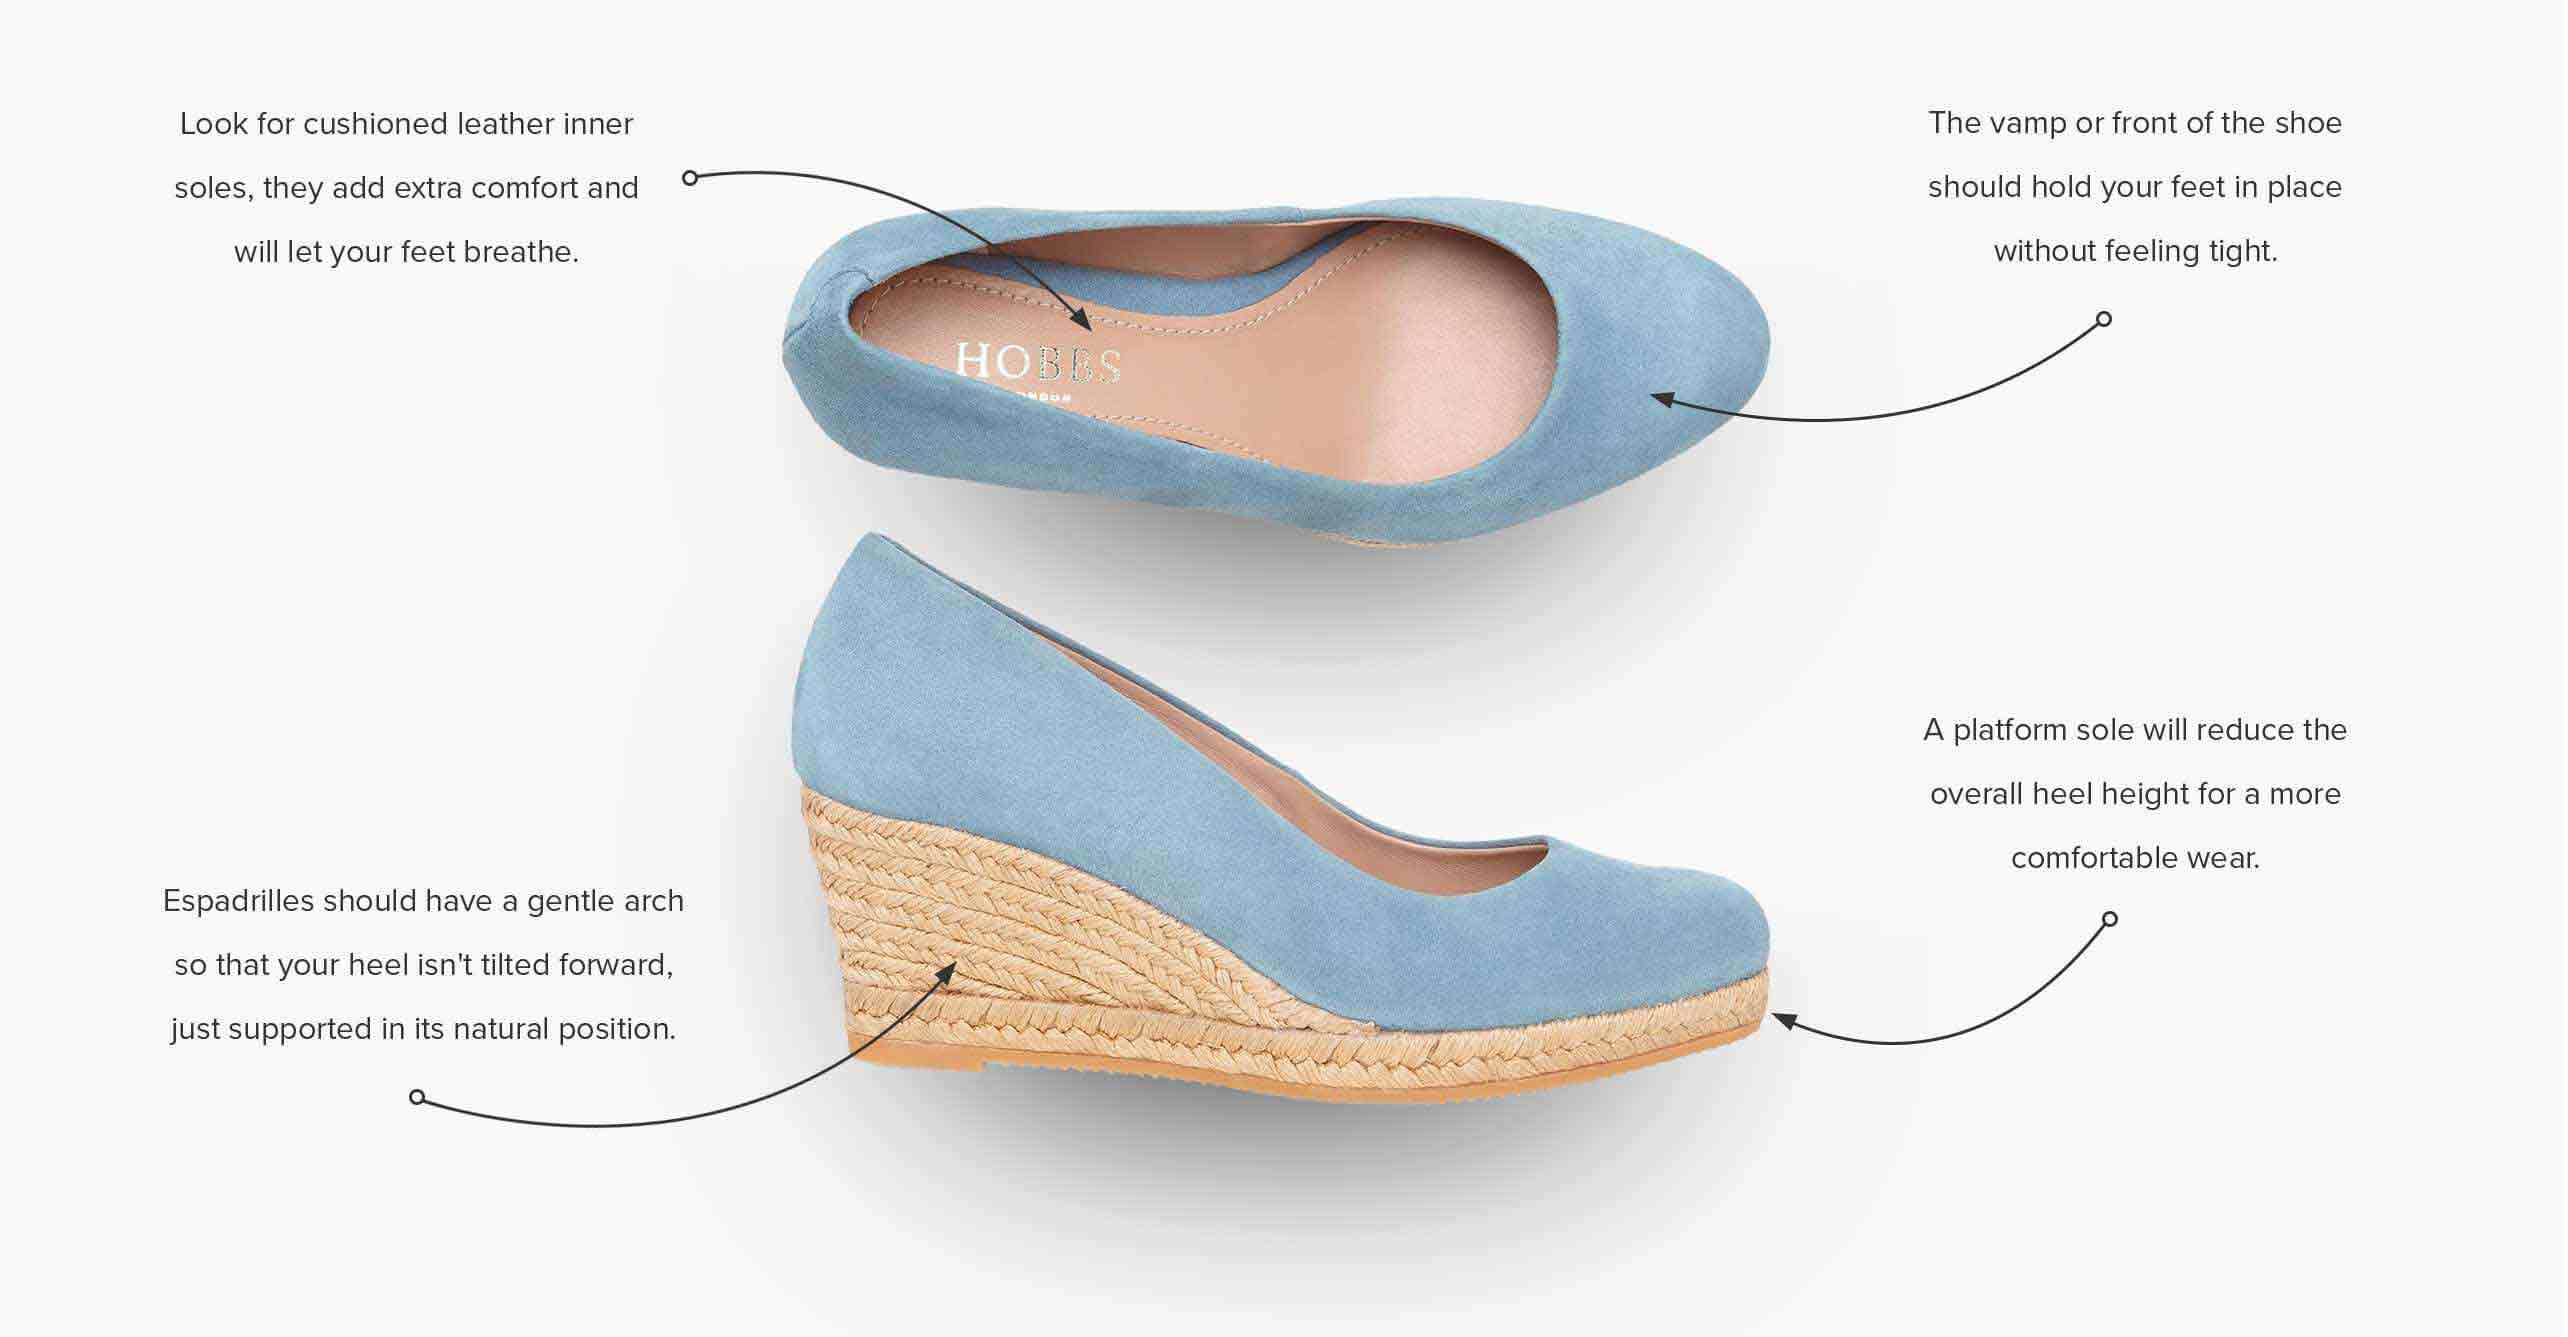 https://www.hobbs.com/on/demandware.static/-/Library-Sites-HBSharedLibrary/default/dwd26f3aa9/content-pages/ways-to-wear-espadrilles/2022/lazy/How-To-Wear-Espadrilles-p1_desktop.jpg